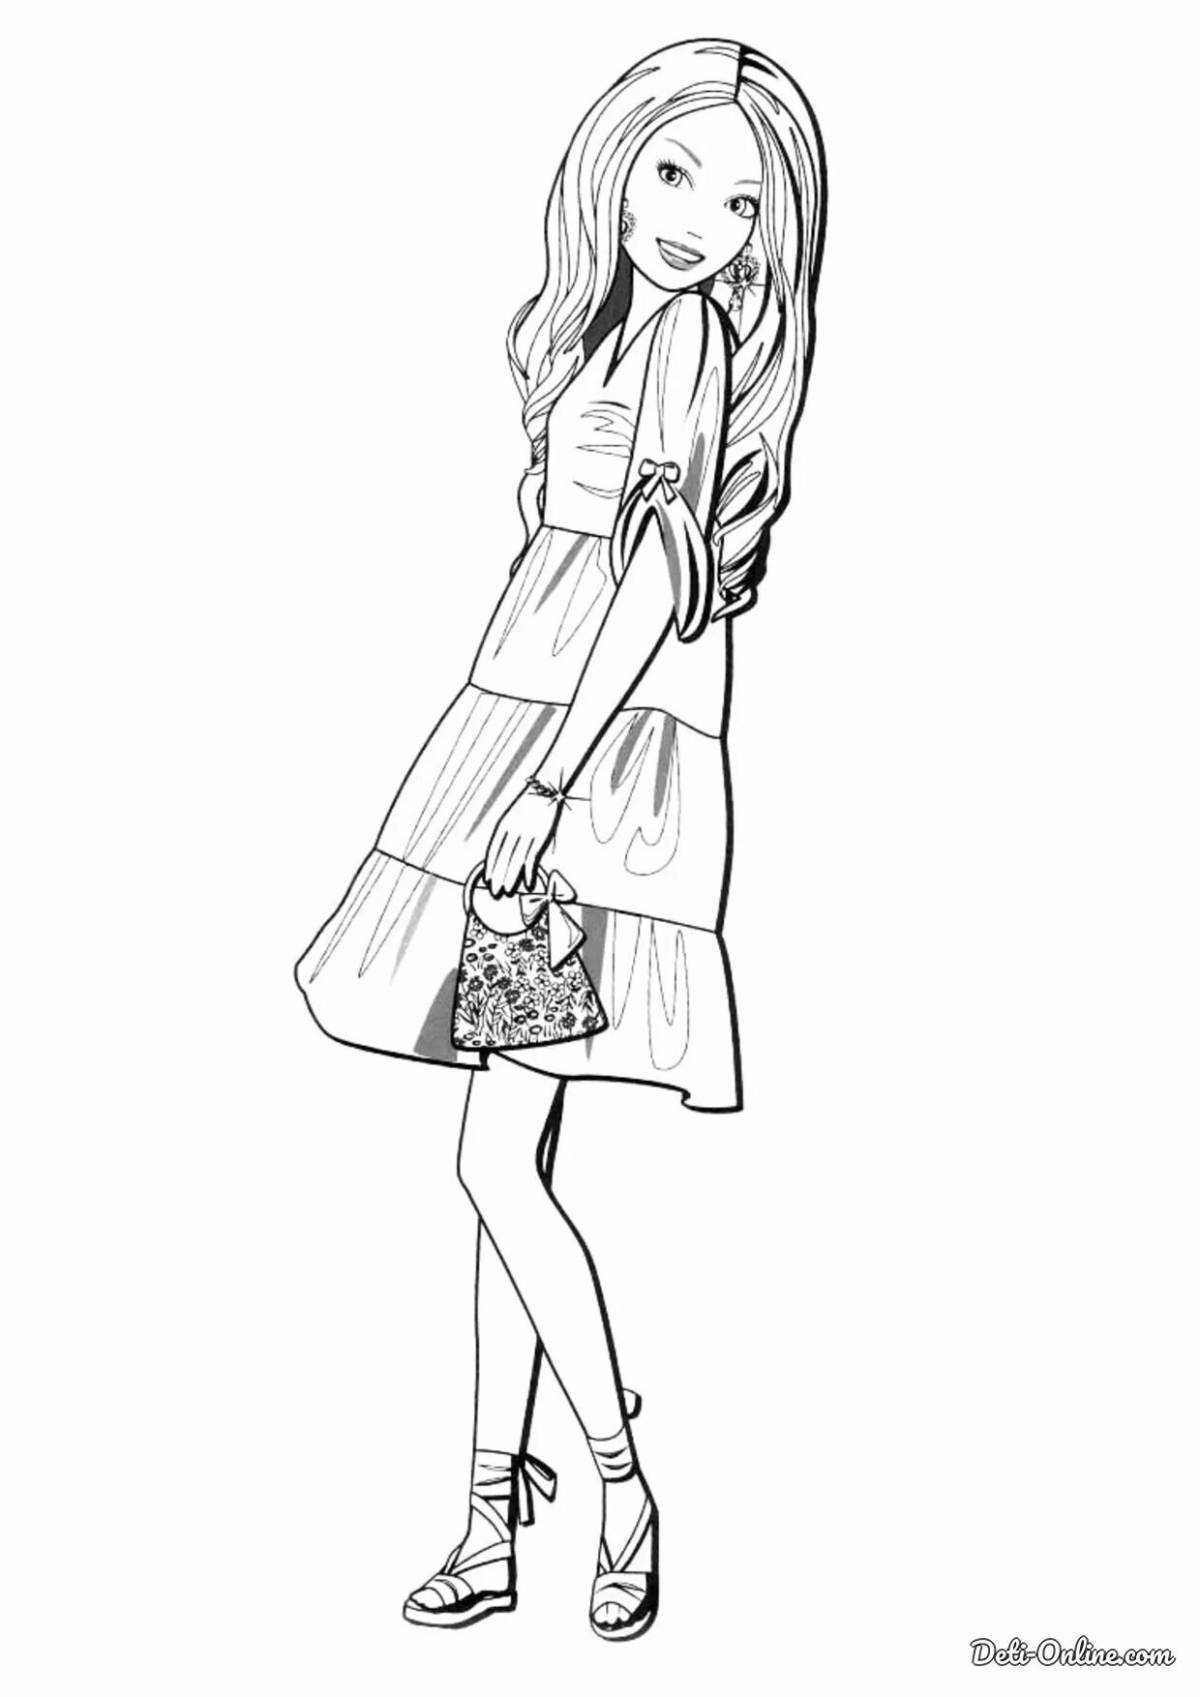 Coloring pages stylish girls - elegant